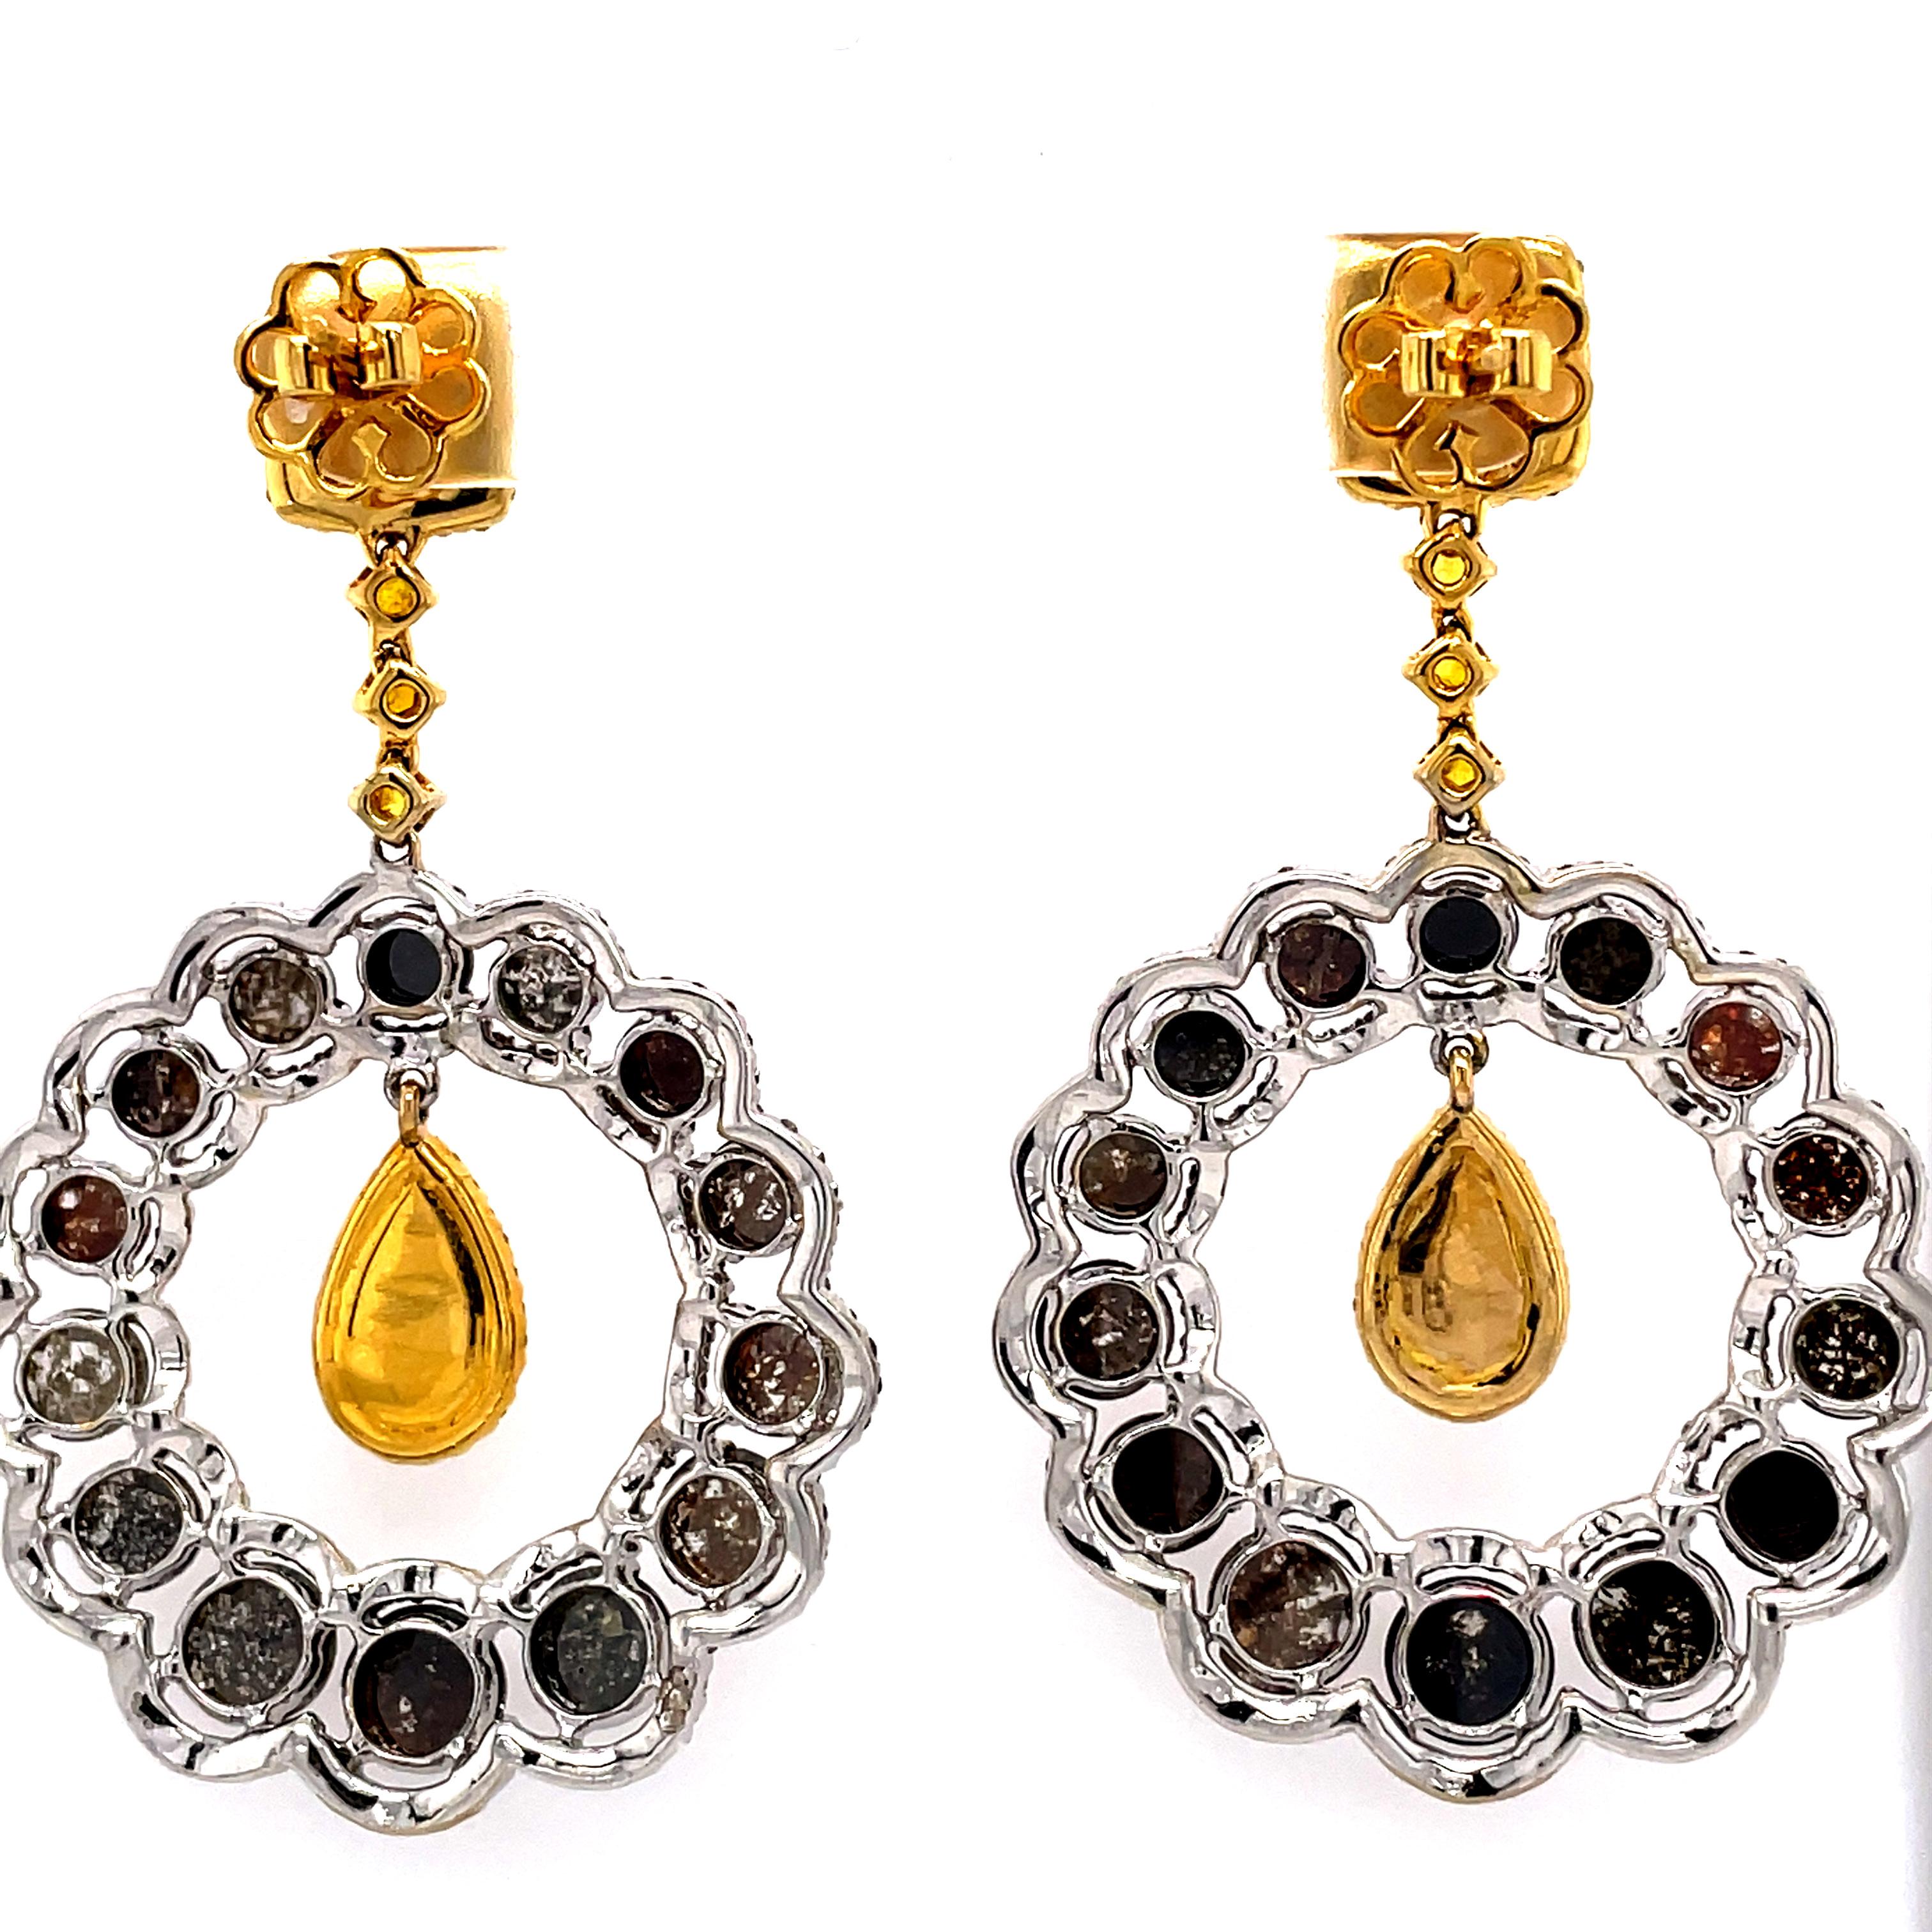 Artisan 14Kt Yellow Gold and 14Kt White Gold 11.43 Carat Diamond Chandelier Earrings For Sale